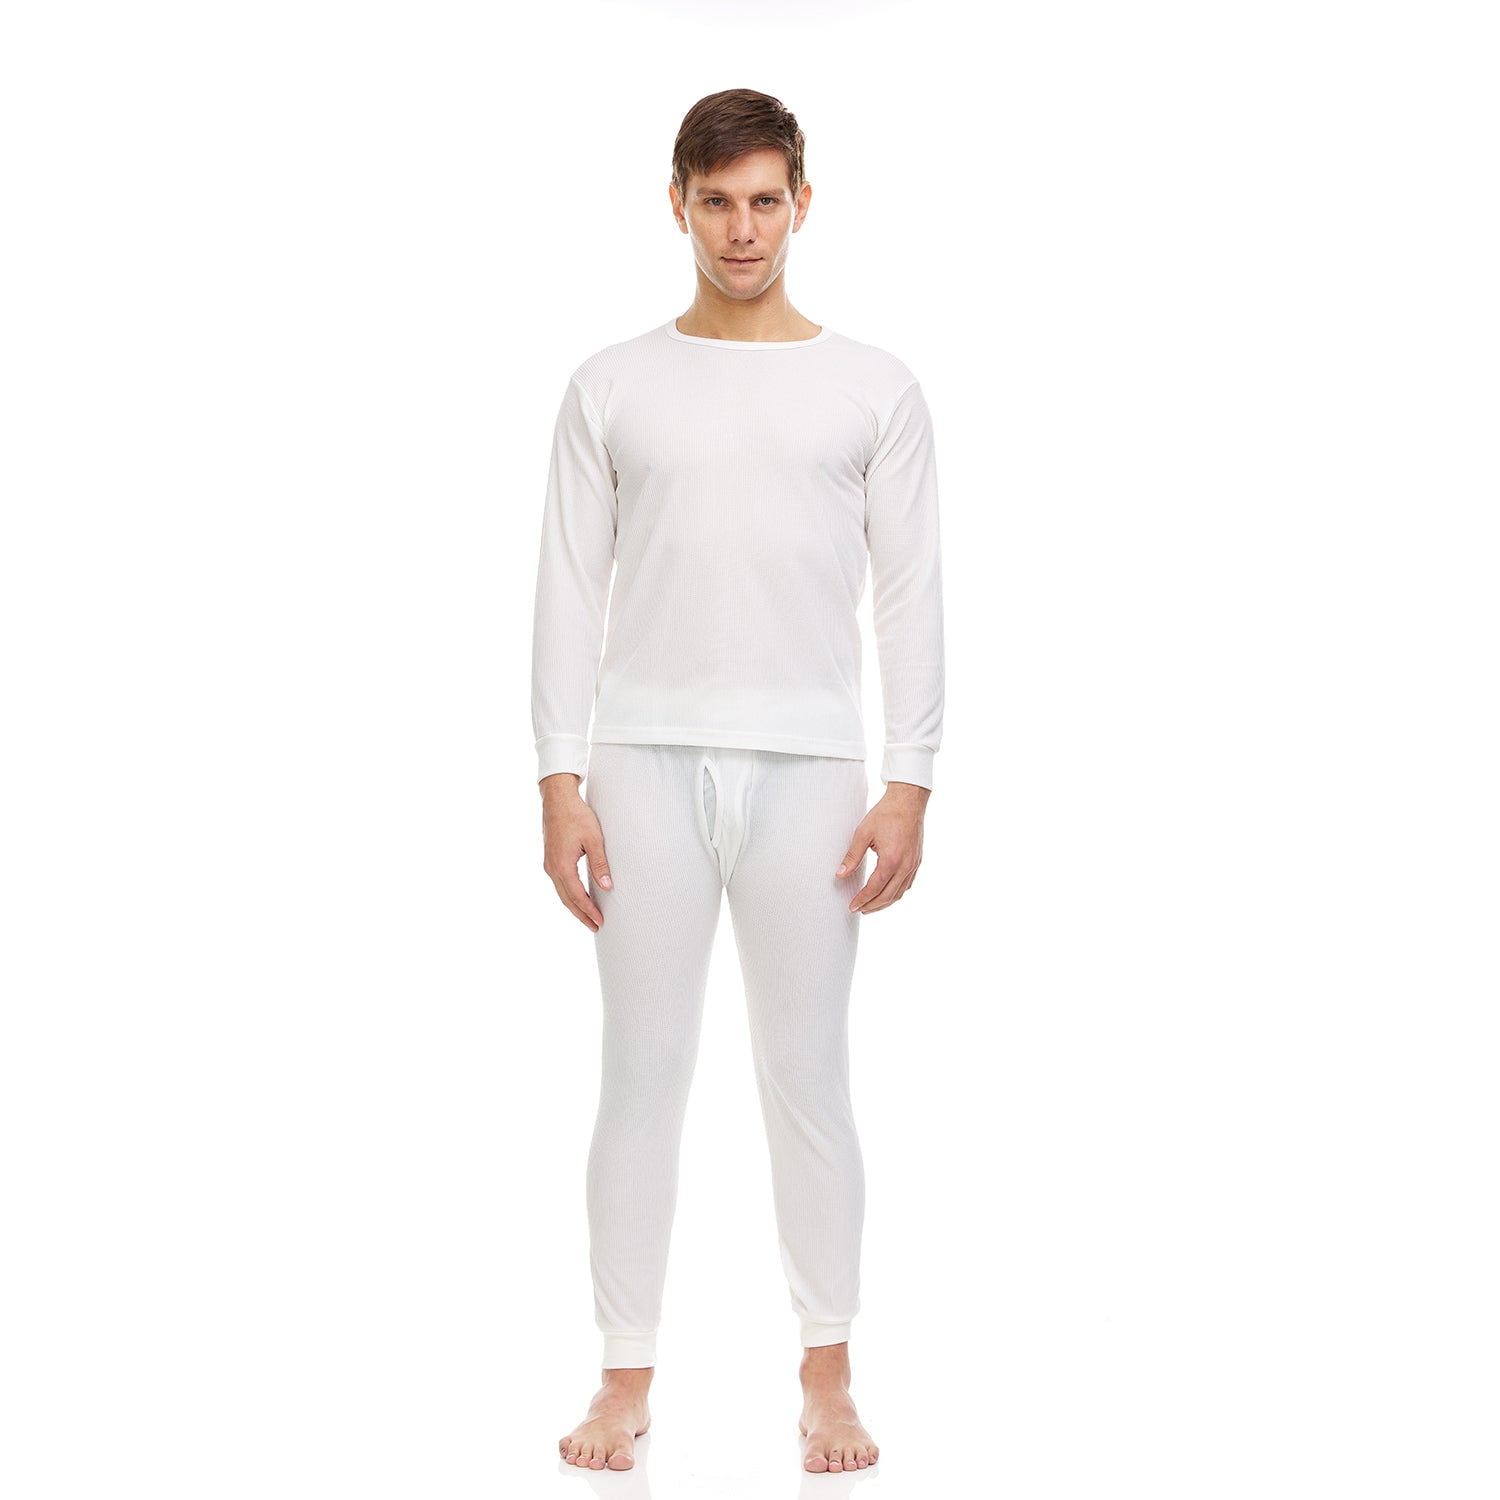 2 Piece Thermal Sets for Men, Base Layer Long Johns Underwear, Top &  Bottom, Cotton, Solid Colors 